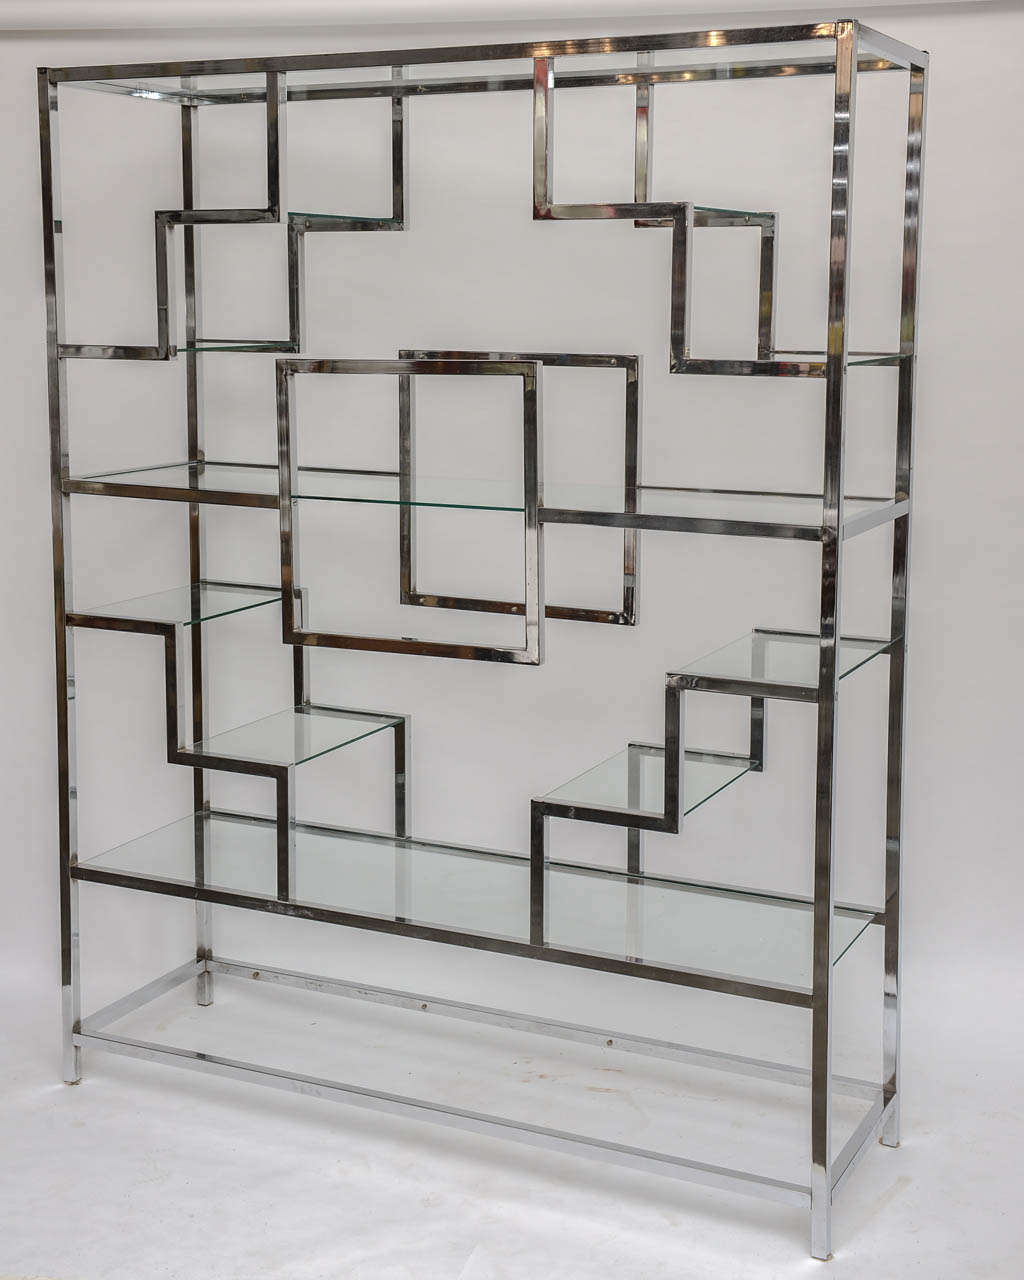 Substantial multi-leveled vintage chrome étagère. Could be used as a chic room divider or against a wall. 14 shelves.